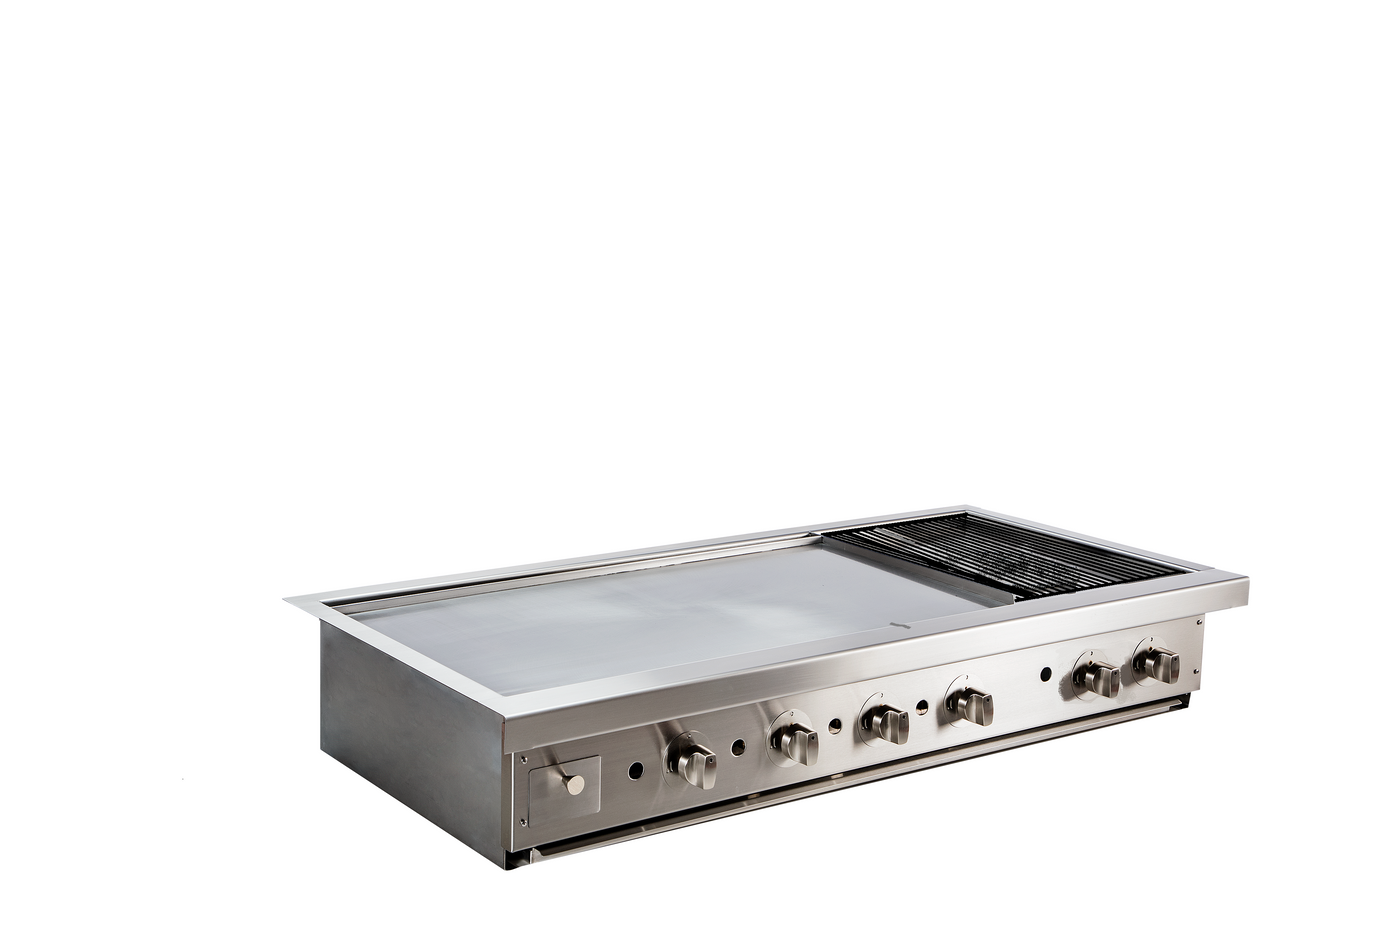 Infresco 1185mm Barbecue - 865mm Hotplate/320mm Grill with Flat Lid